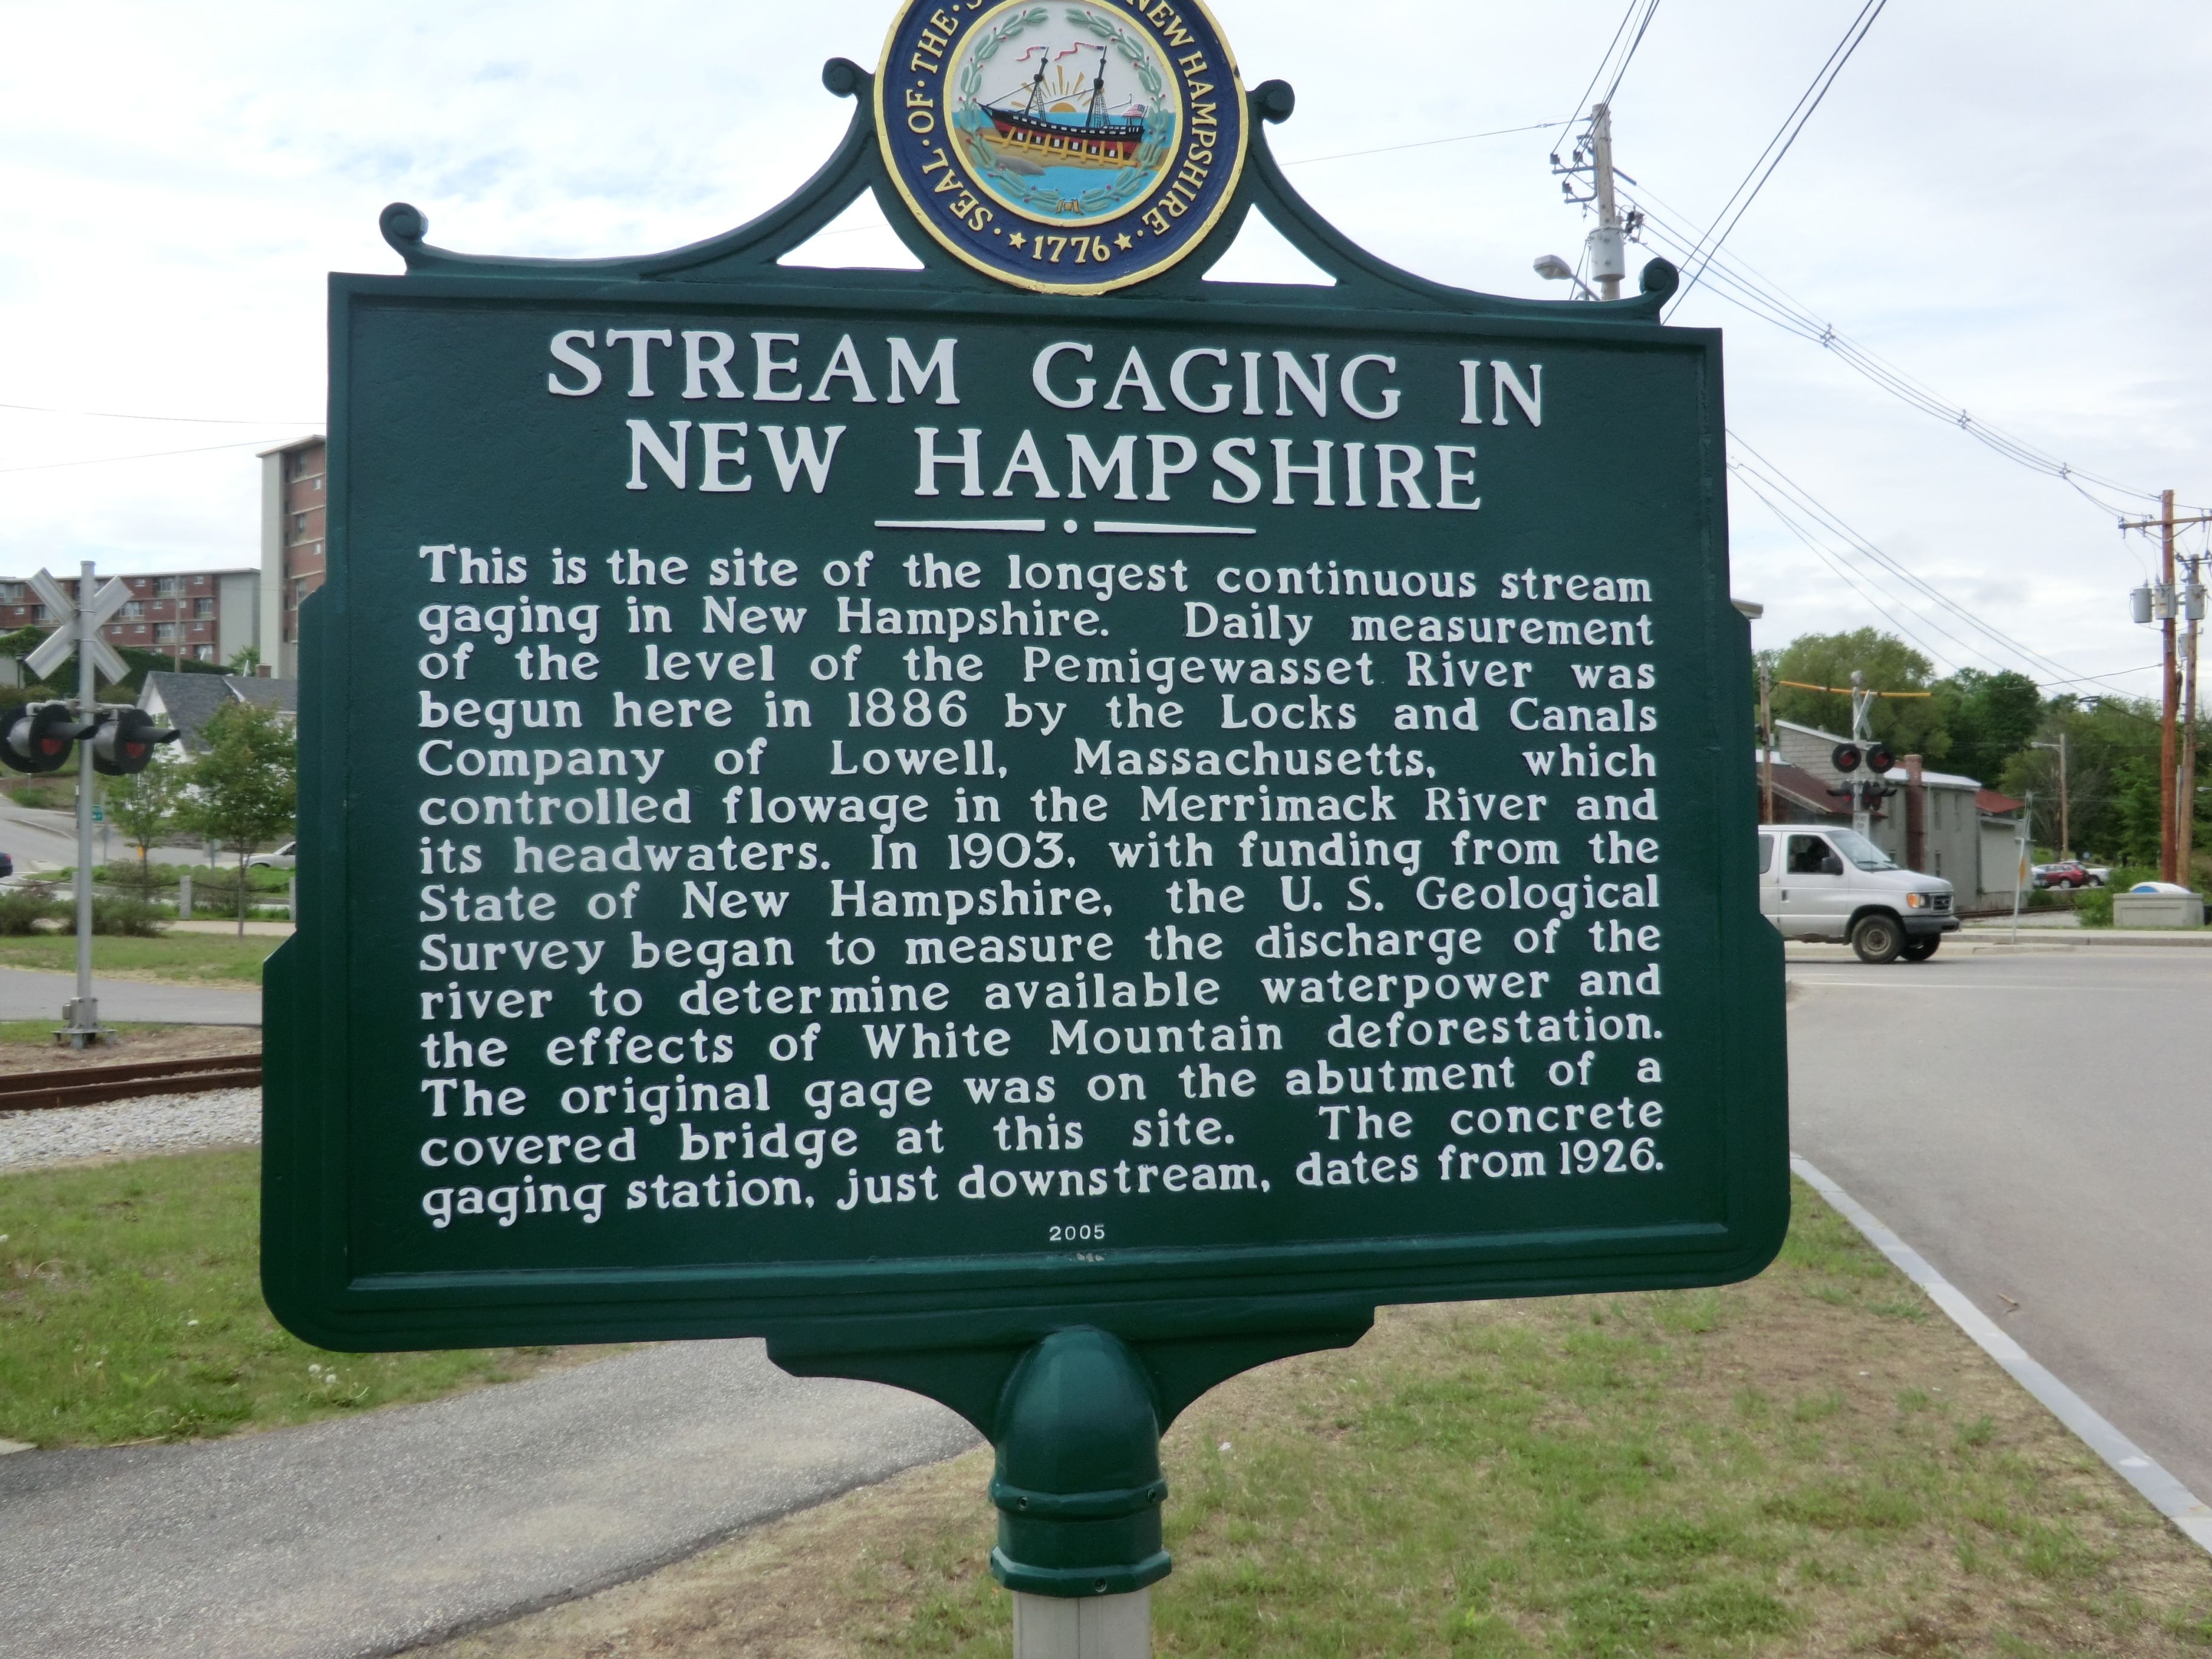 Stream Gaging in New Hampshire Marker